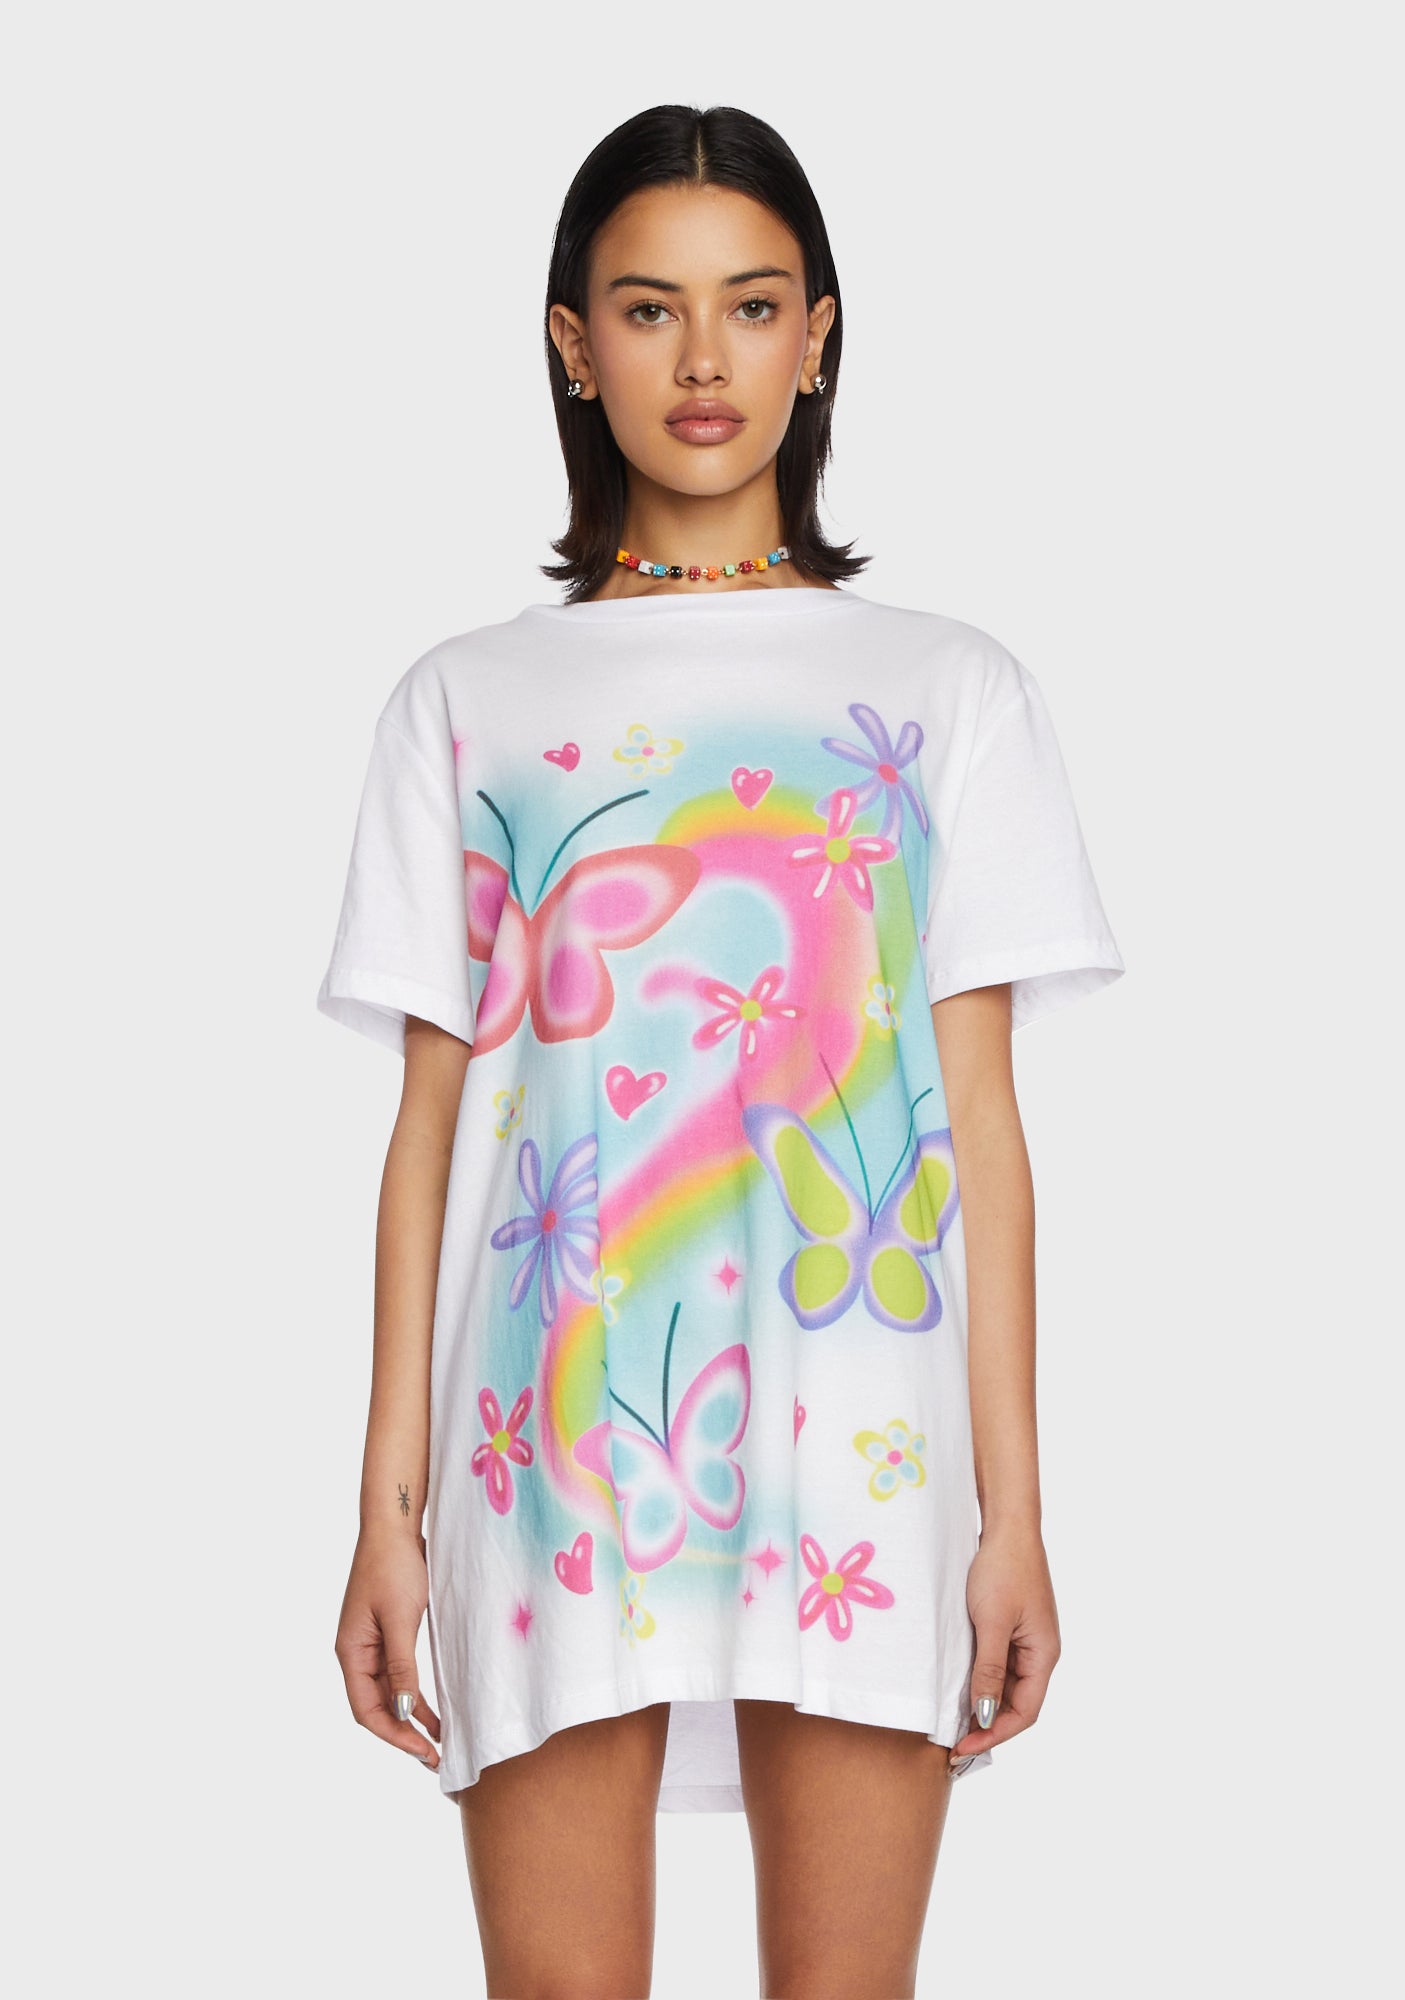 Delia's Airbrush Butterfly Oversized Graphic Tee - White/Multi – Dolls Kill